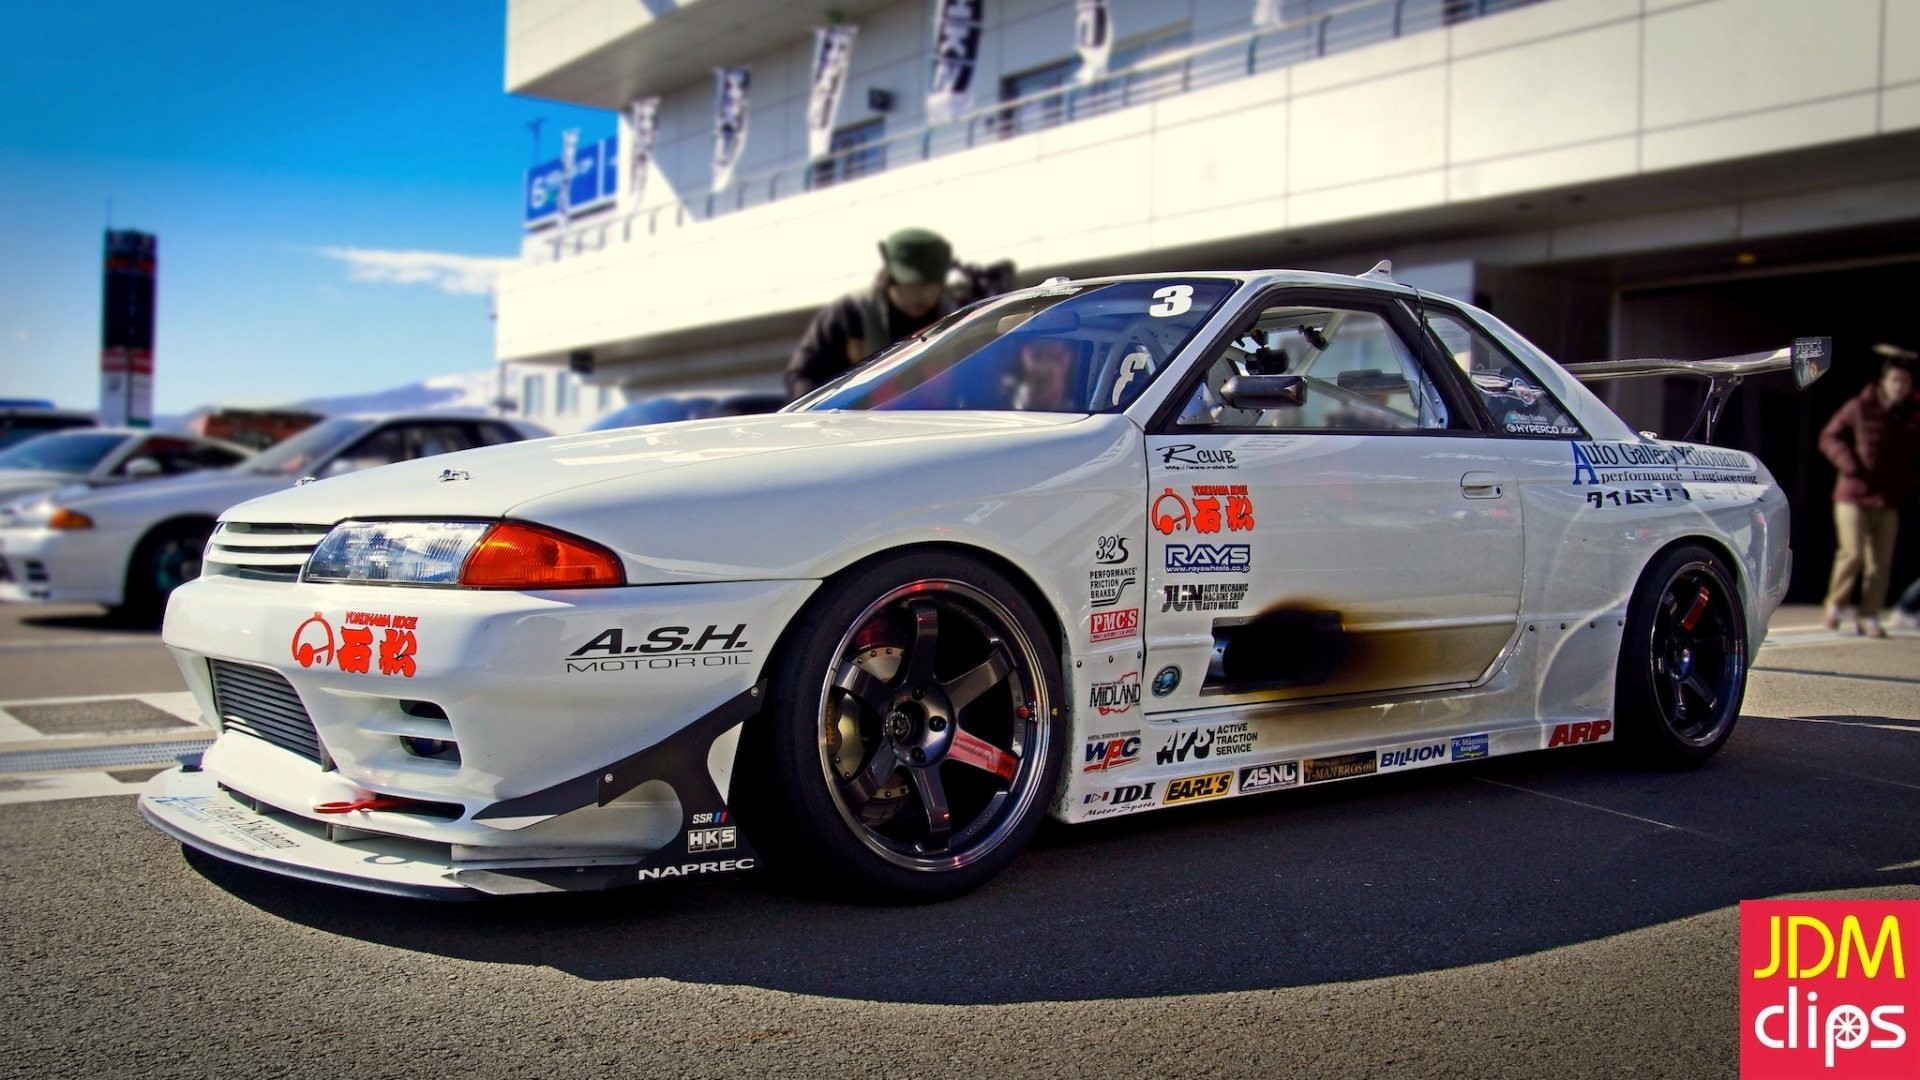 Nissan Skyline GT R R 32, Nissan Skyline, Nissan GT R R32, Nissan, JDM  Wallpapers HD / Desktop and Mobile Backgrounds